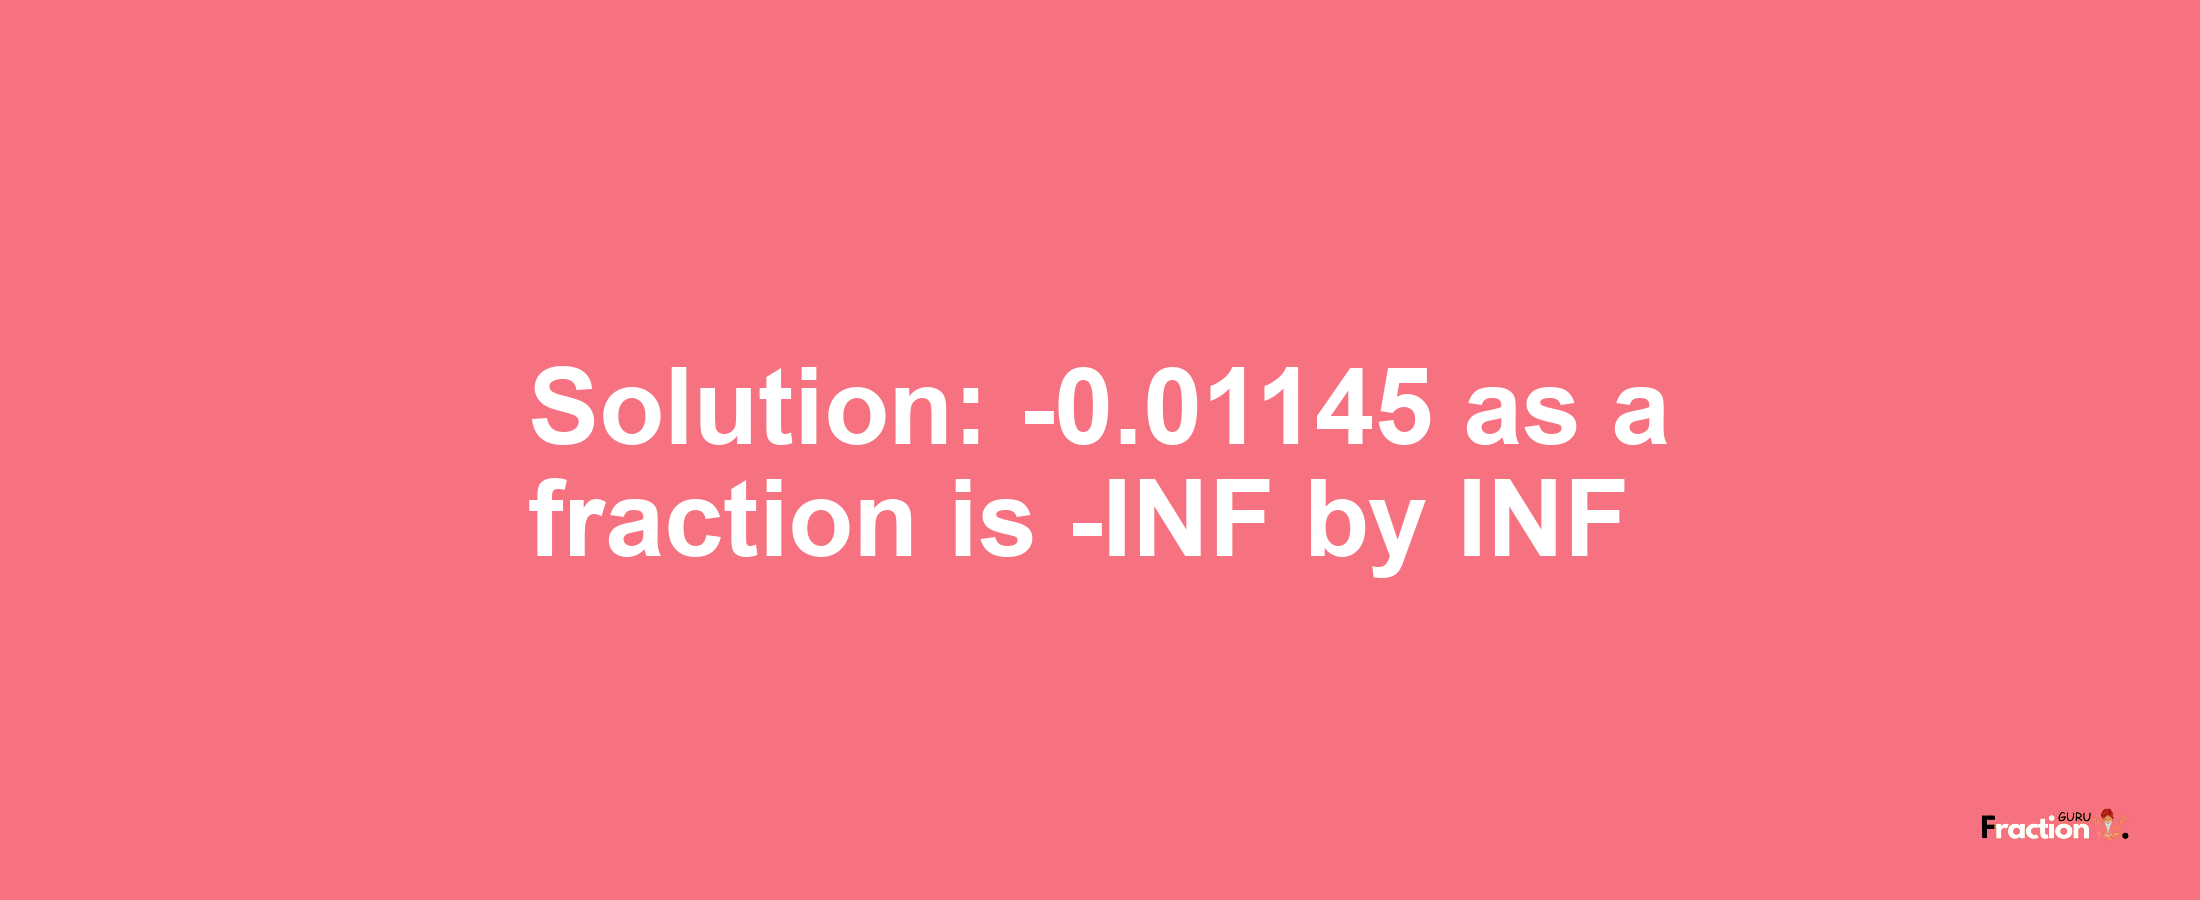 Solution:-0.01145 as a fraction is -INF/INF